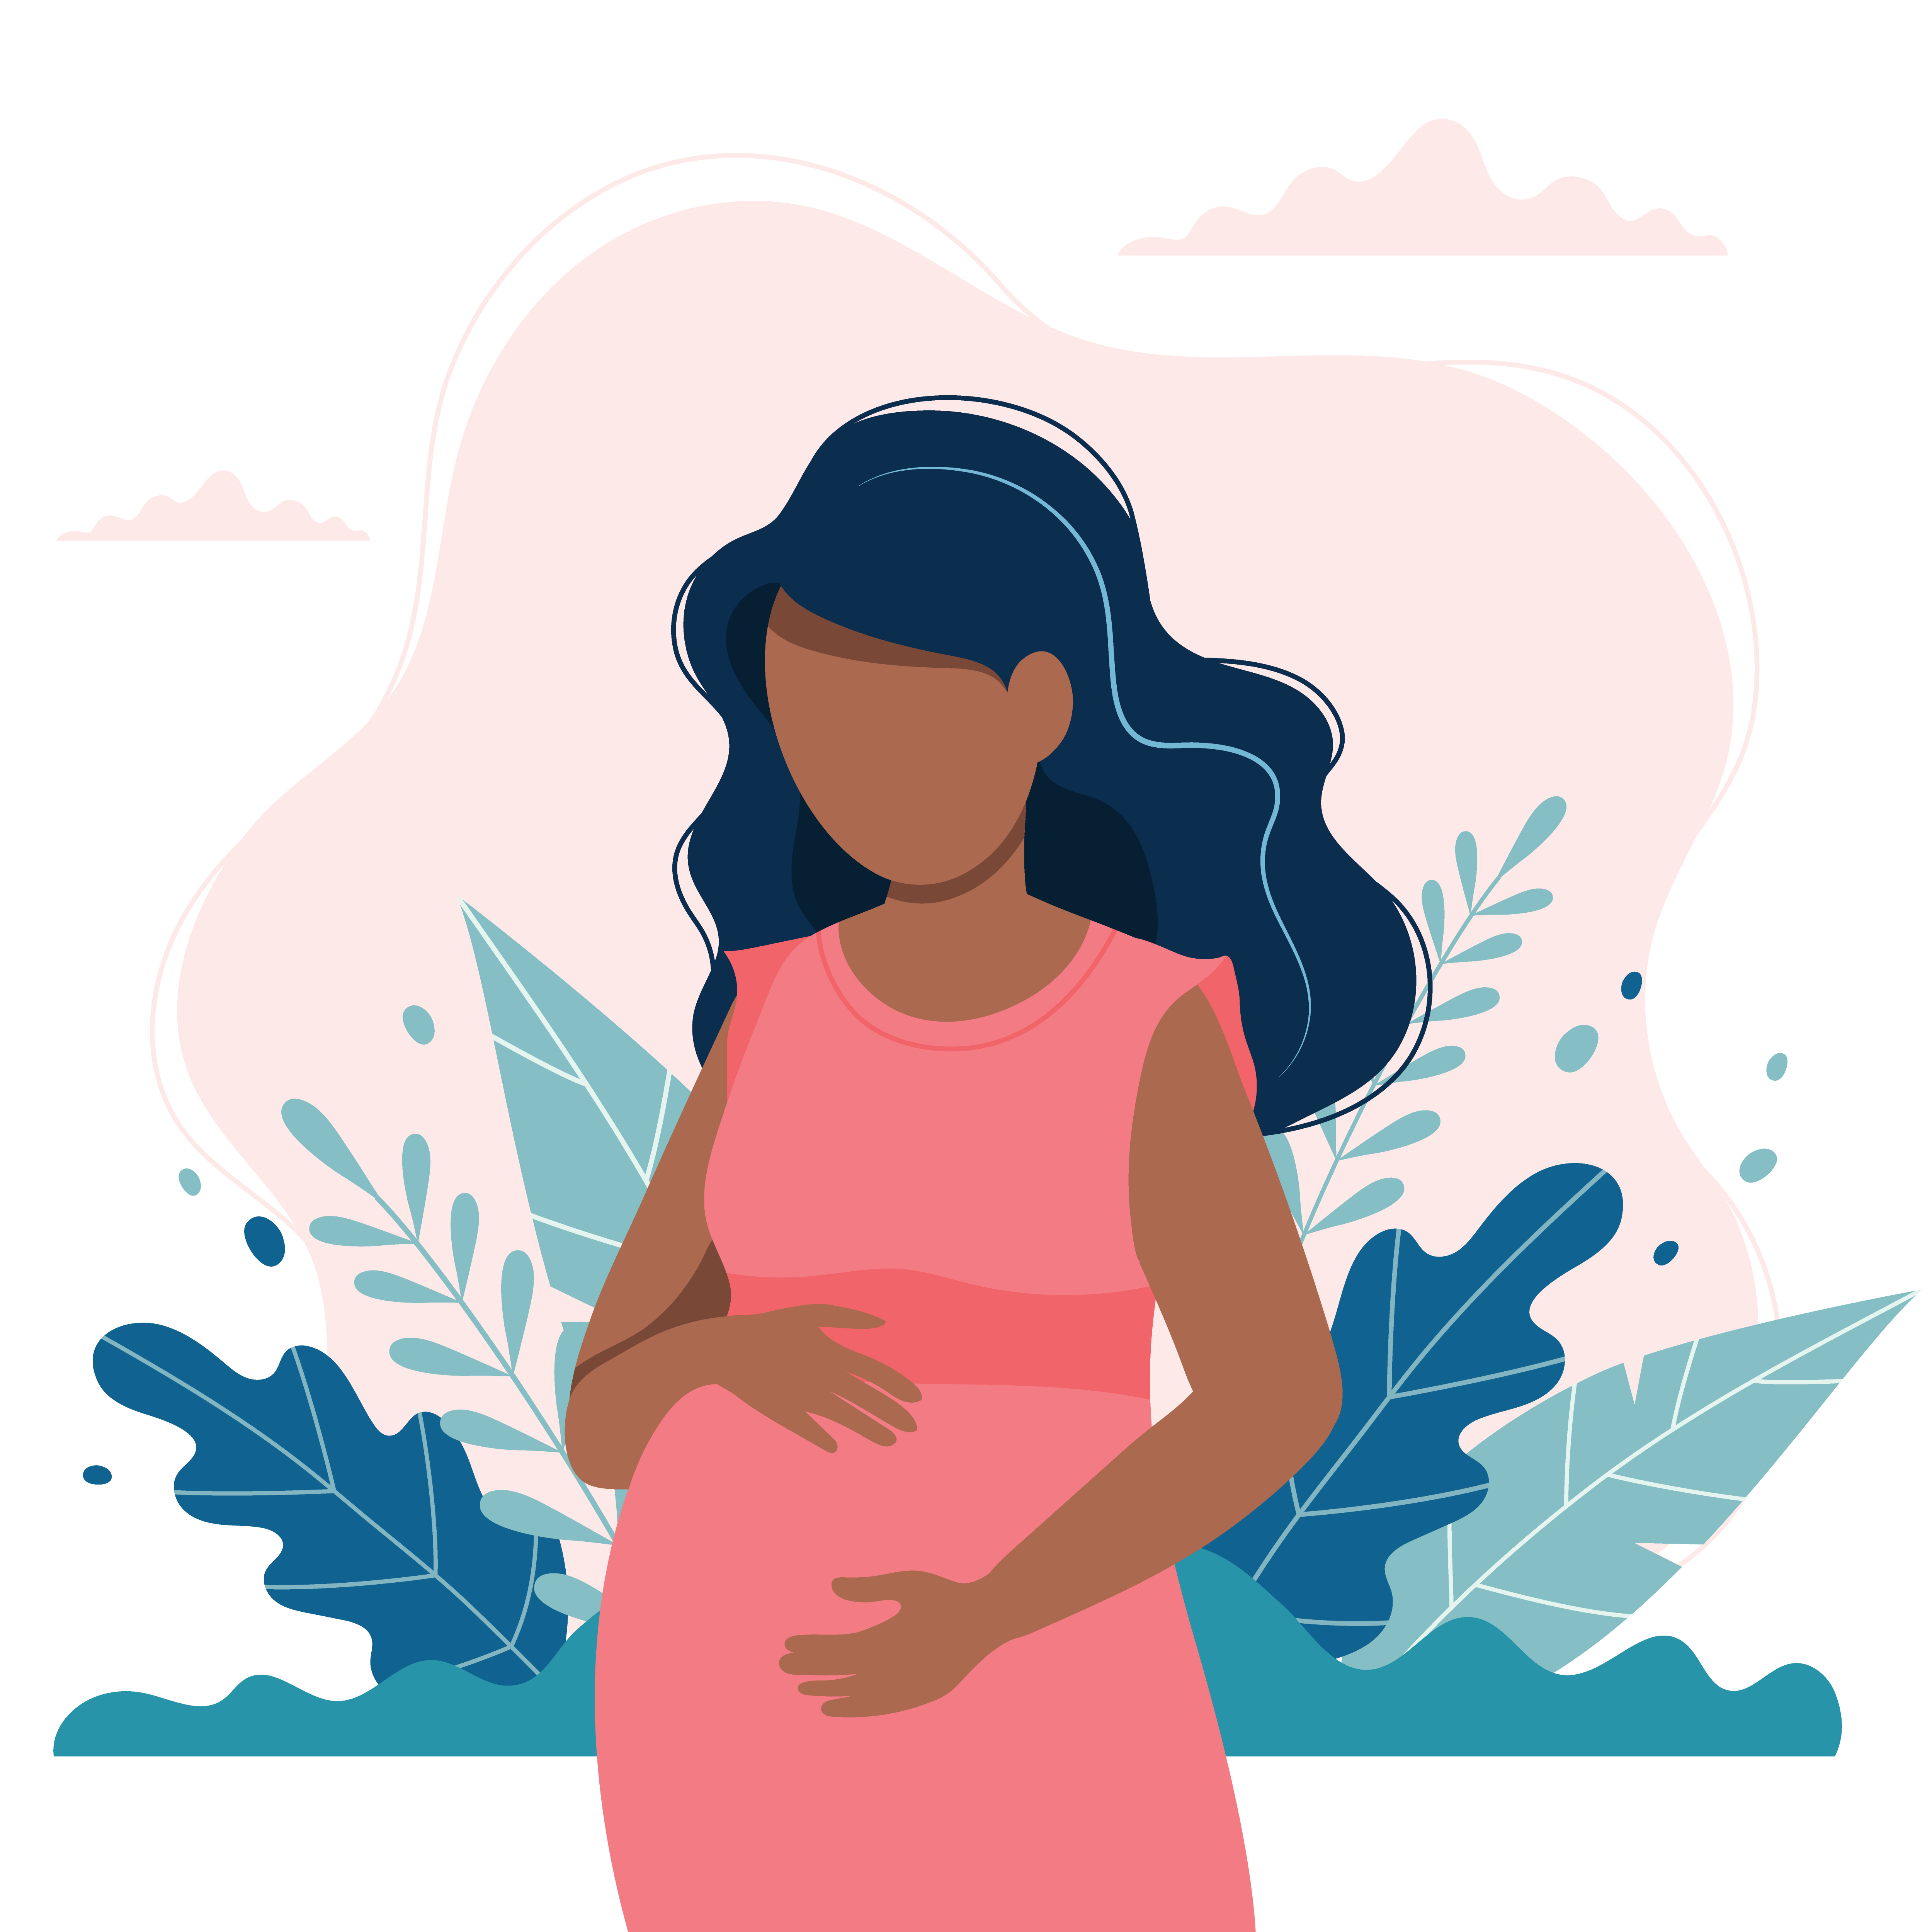 Illustration of a pregnant woman with long black hair and dark brown skin in a pink dress holding her stomach